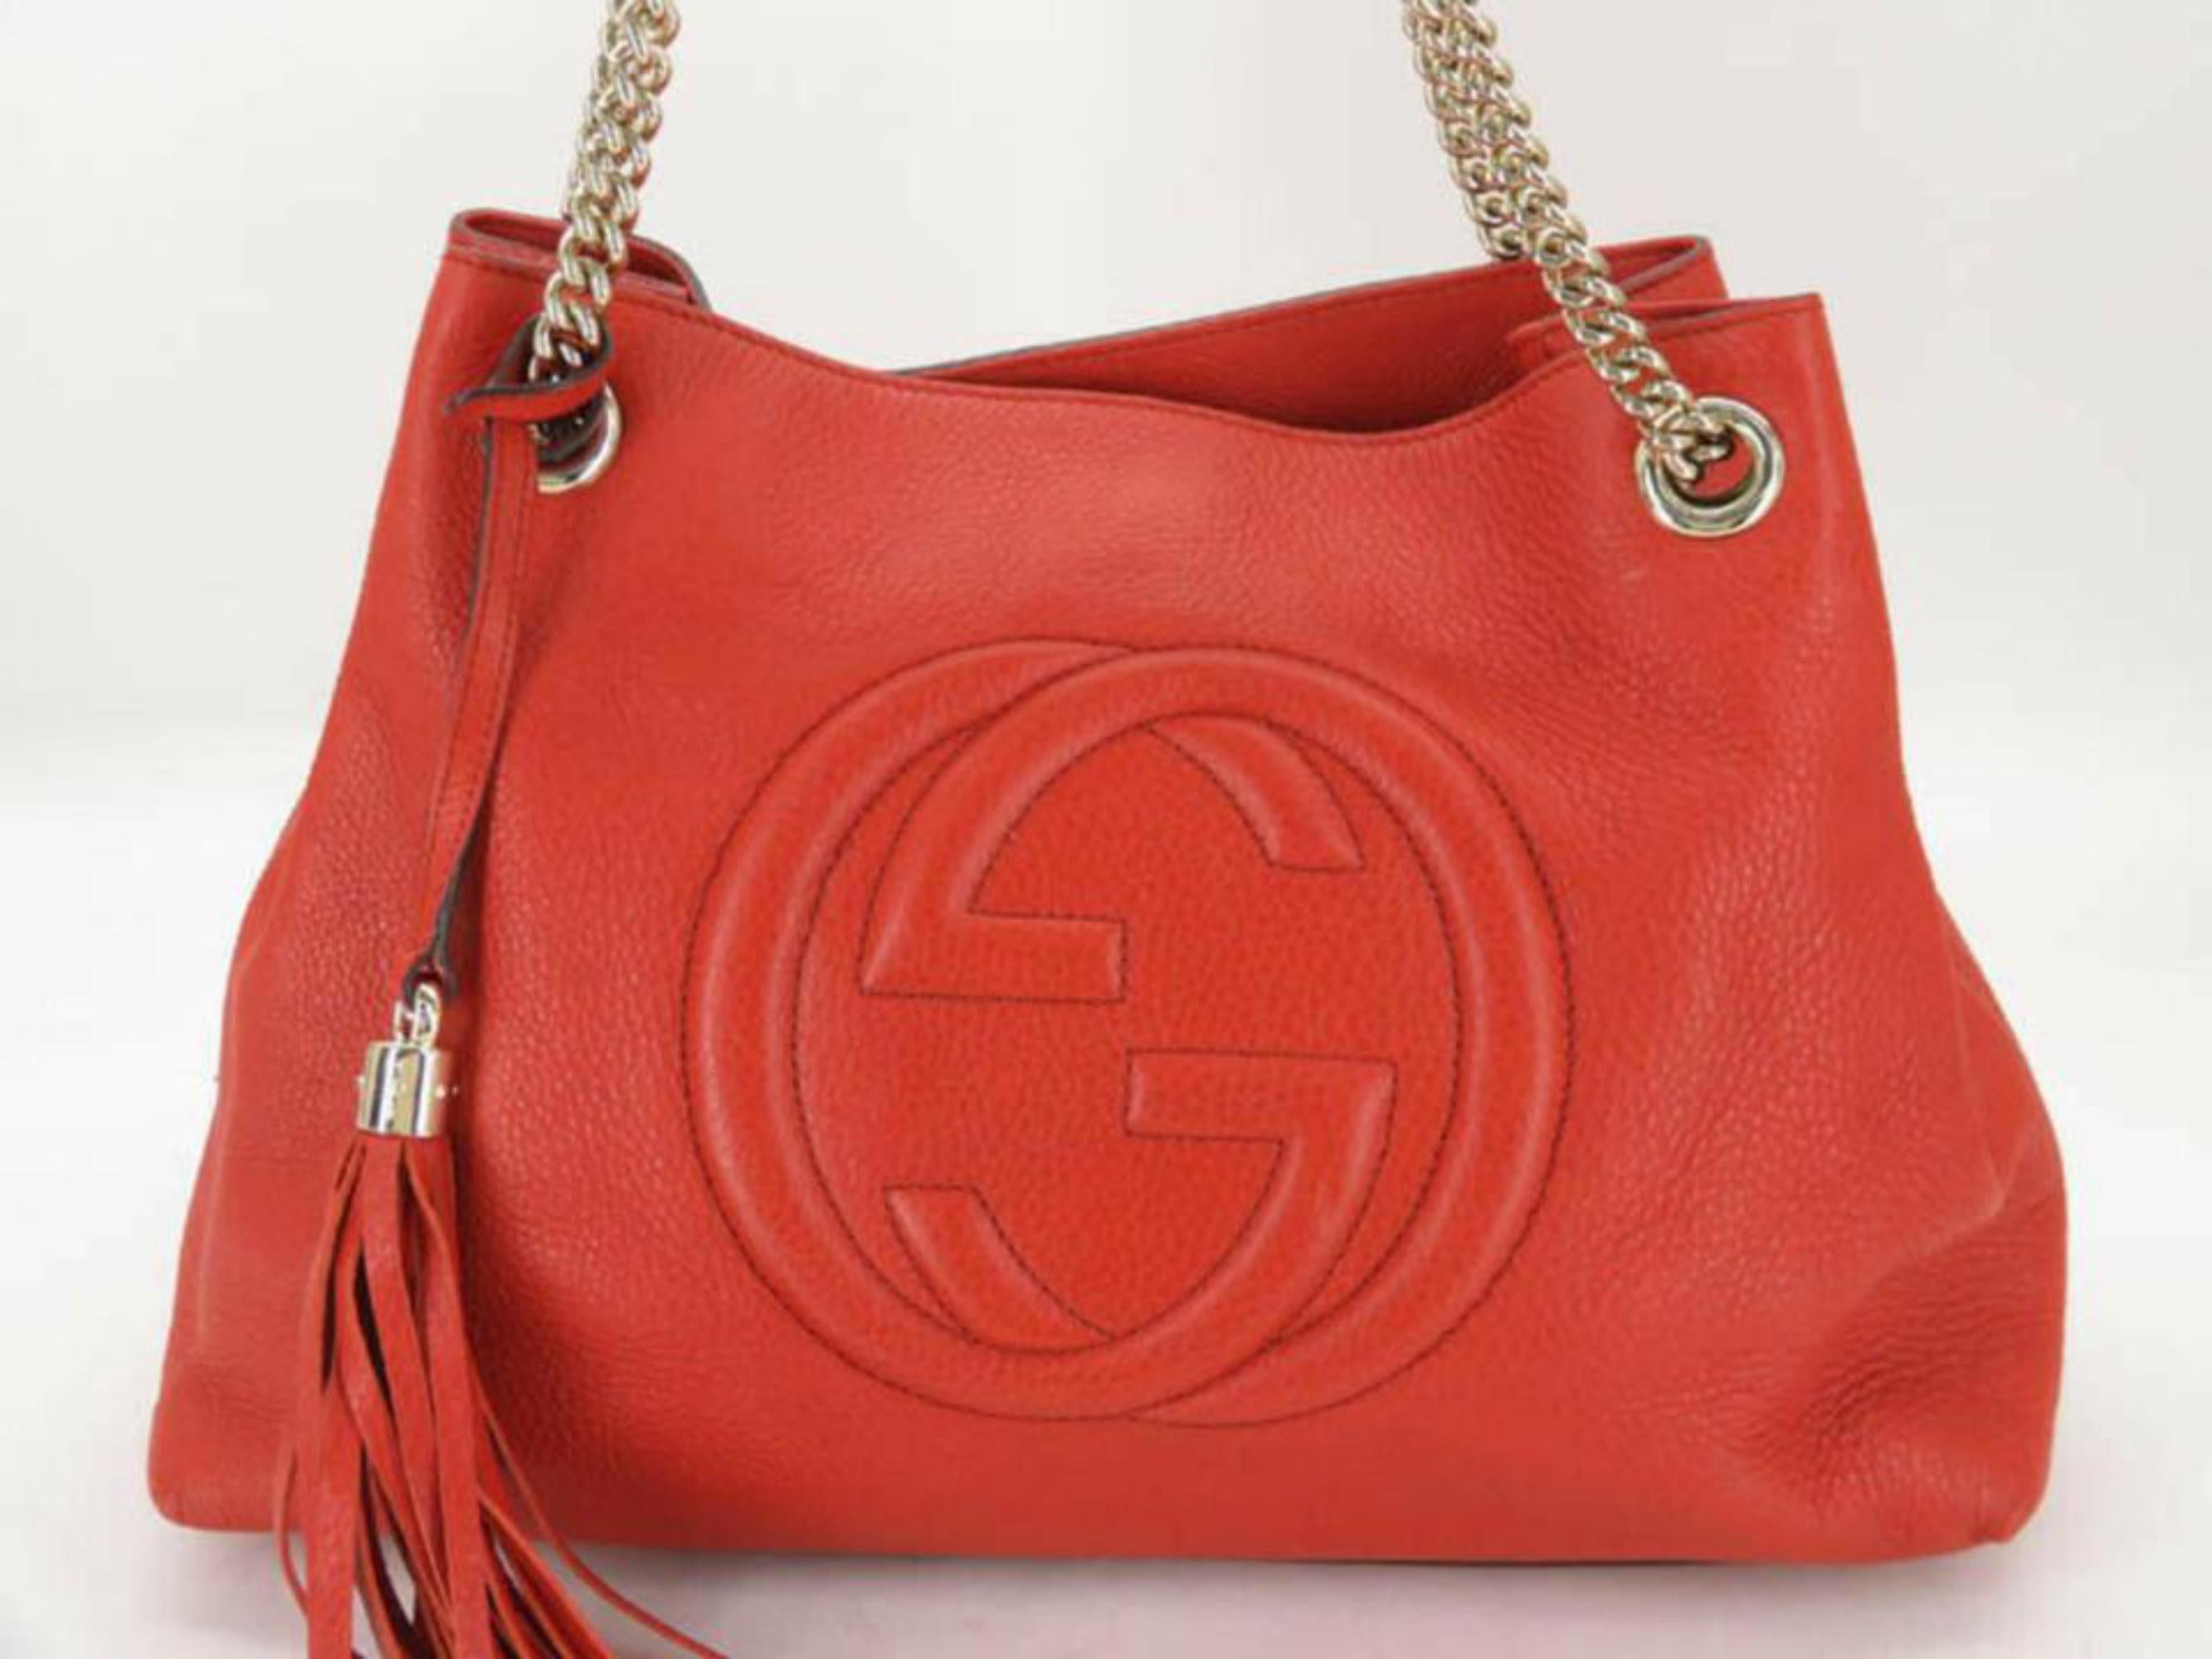 Gucci Soho Fringe Tassel Chain 870255 Red Leather Tote For Sale 7